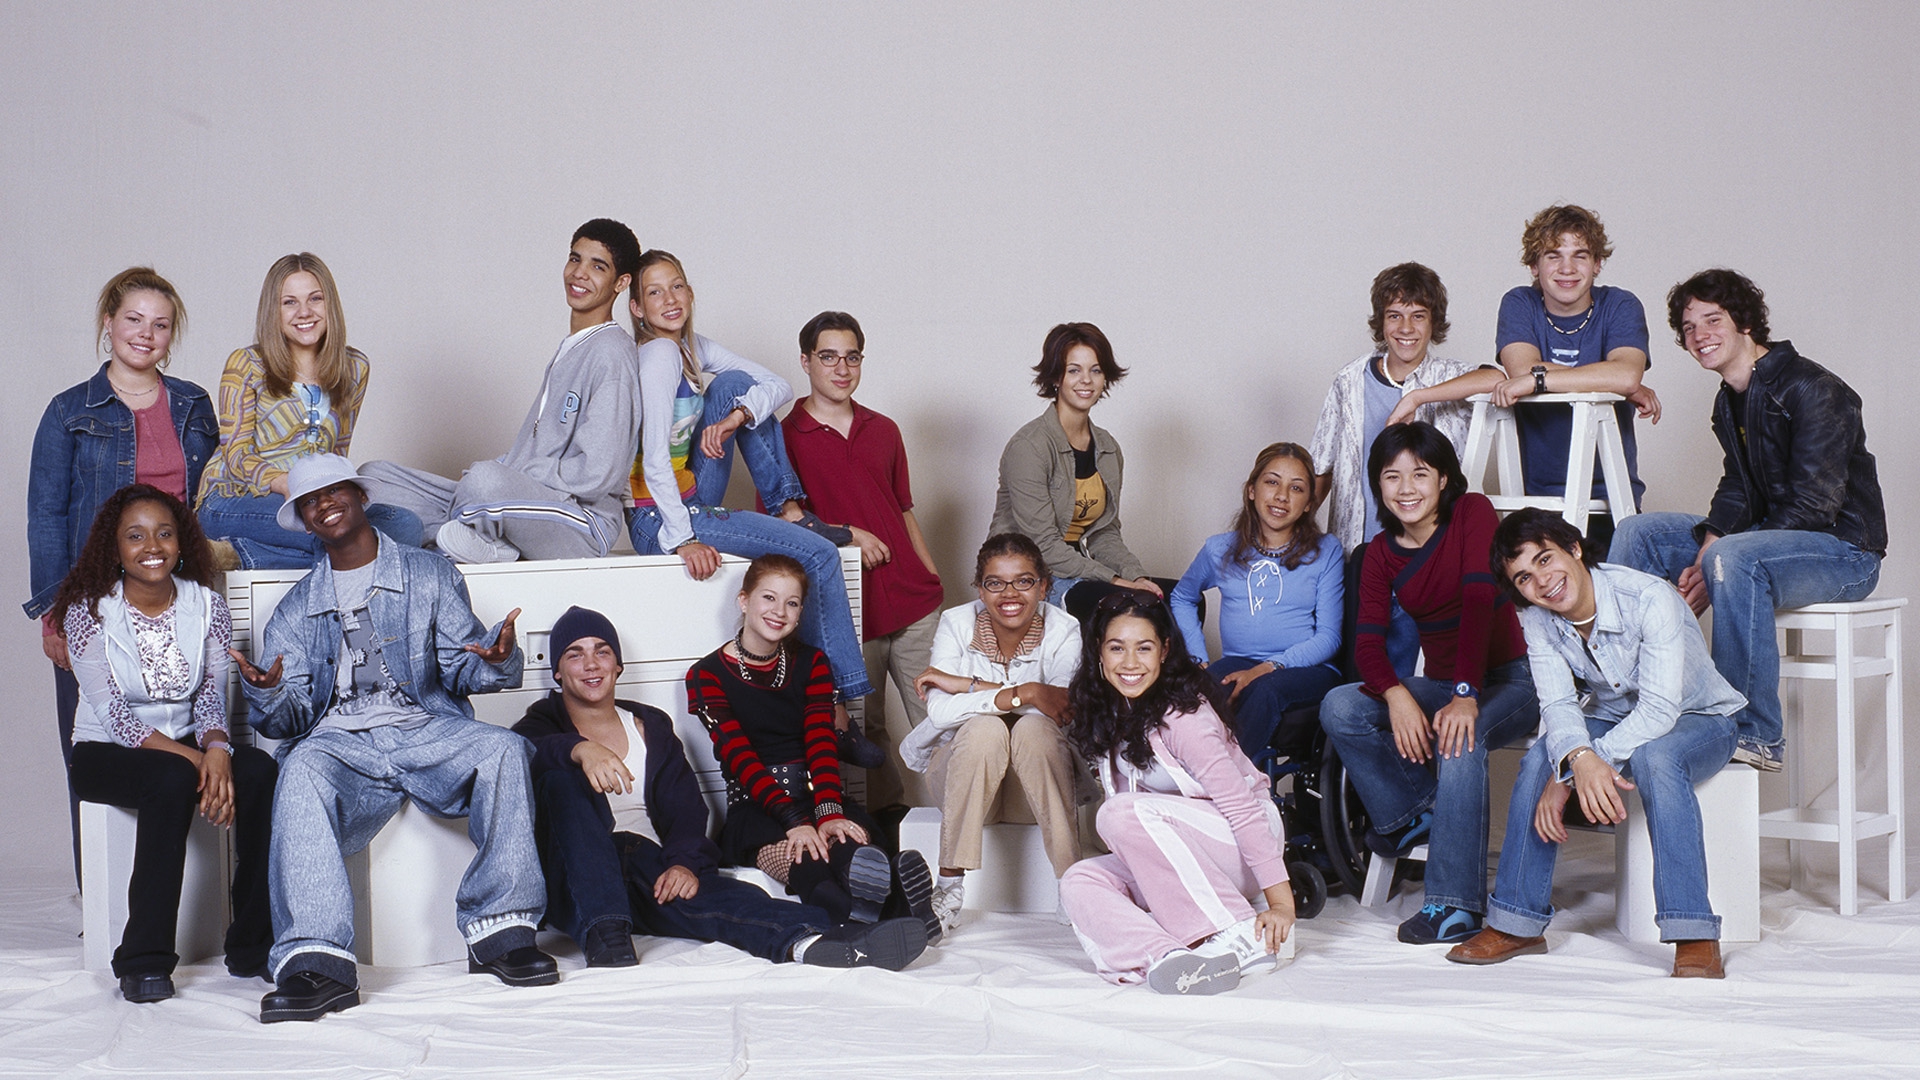 Одеяло ДЕГРАССИЯ новый класс. Cast picture. Panty Slips from Degrassi the next Generation.